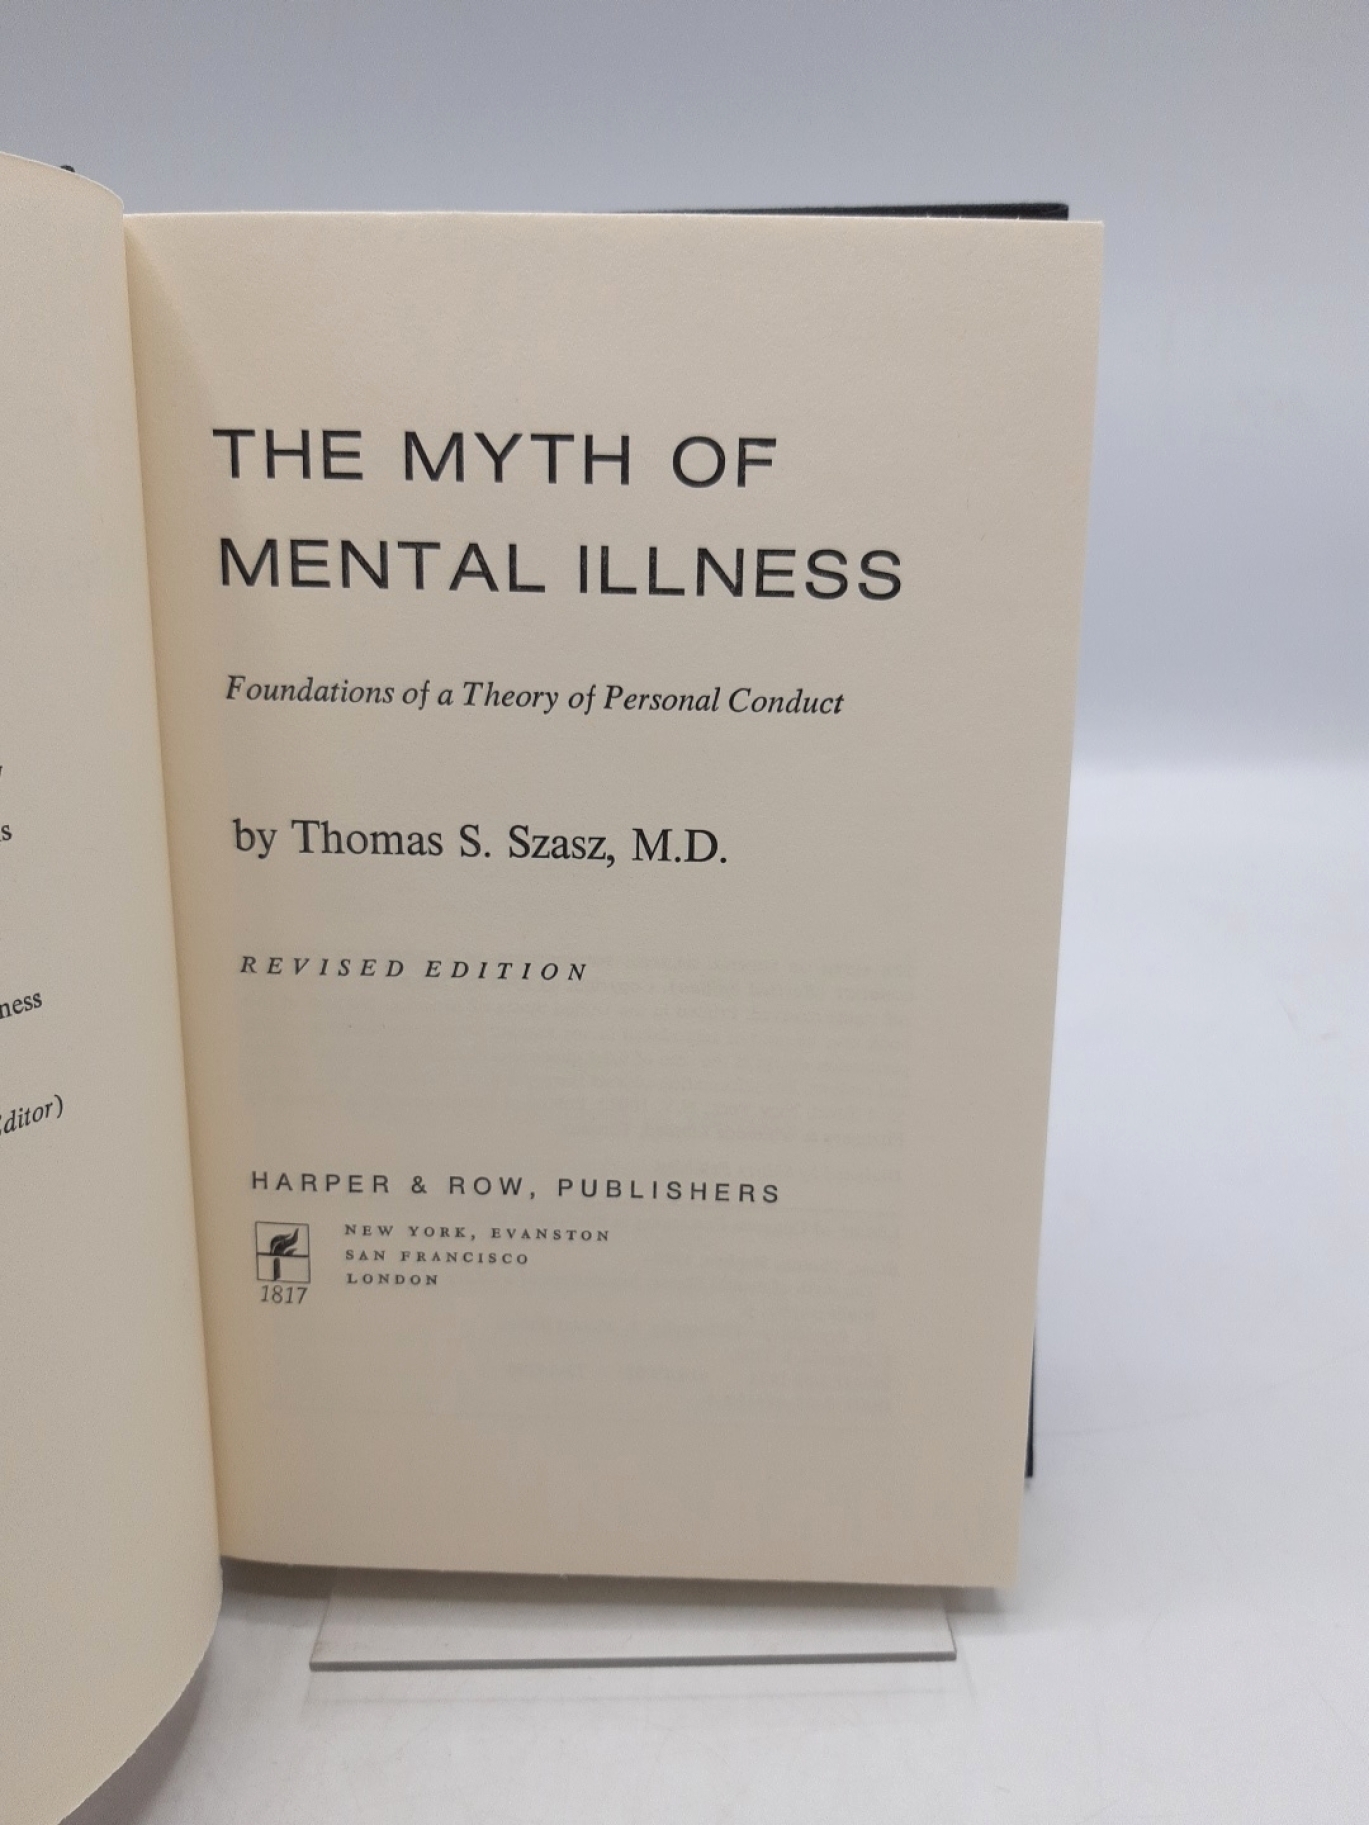 Szasz, Thomas S.: The Myth of Mental Illness Foundations of a Theory of Personal Conduct